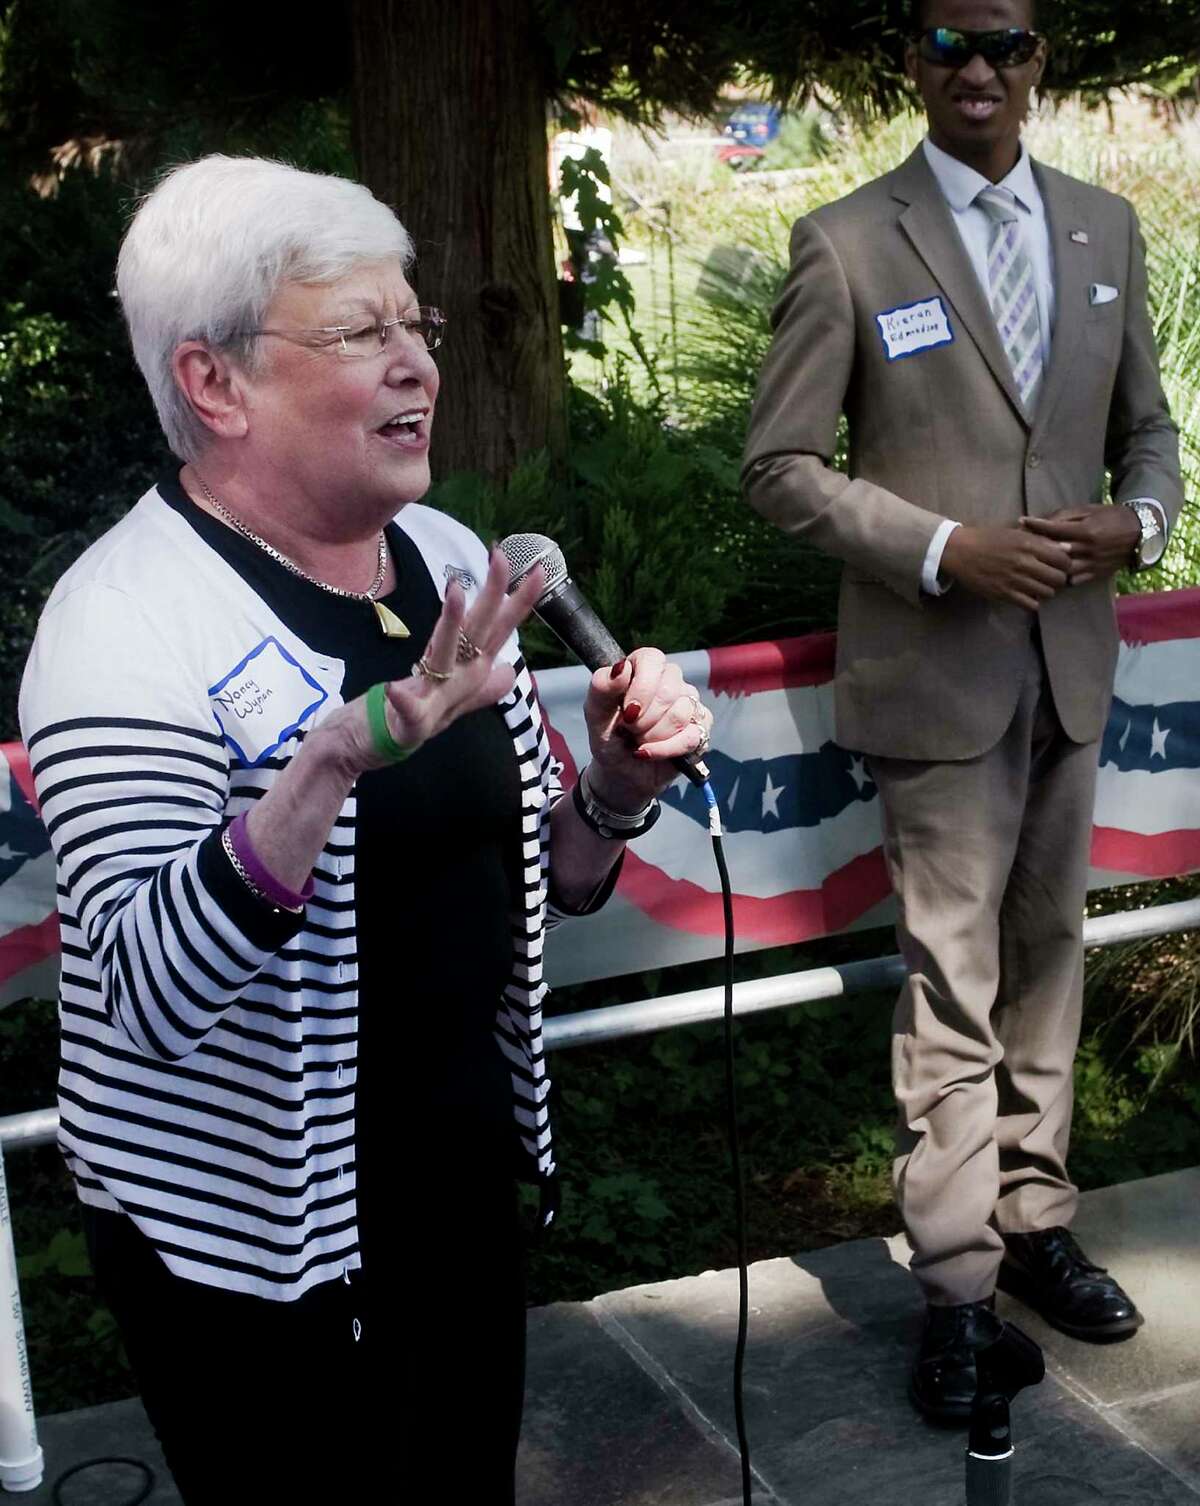 Former Connecticut Lt. Gov. Nancy Wyman welcomes the gathering at the Greenwich Democratic Town Committee's annual picnic at the Greenwich Botanical Center, on Sunday, Sept. 15, 2019